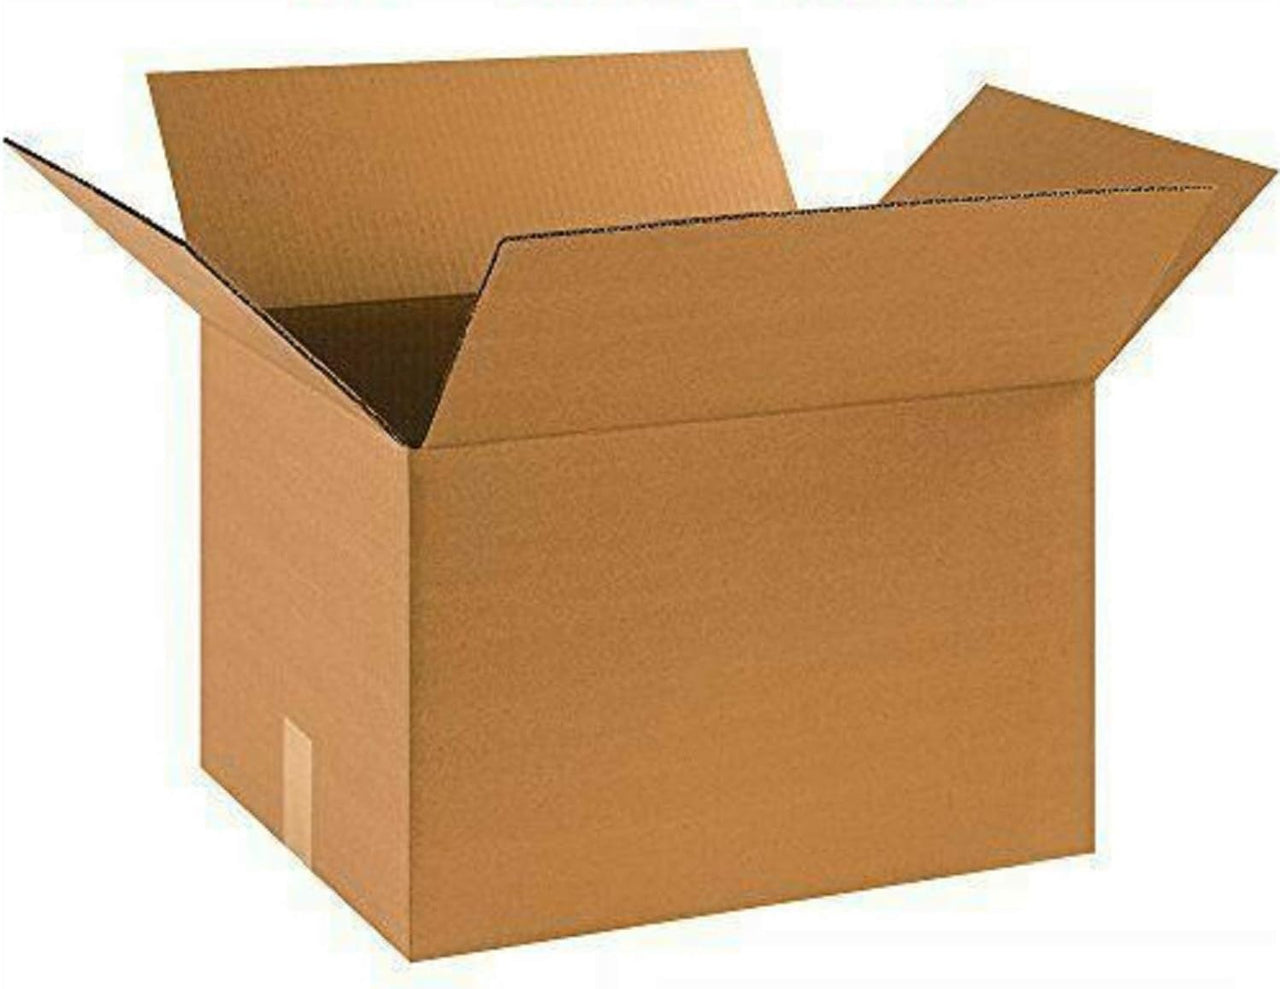 Shipping Boxes 12"L x 12"W x 12"H 10-Pack Corrugated Cardboard Box for Packing Moving Storage